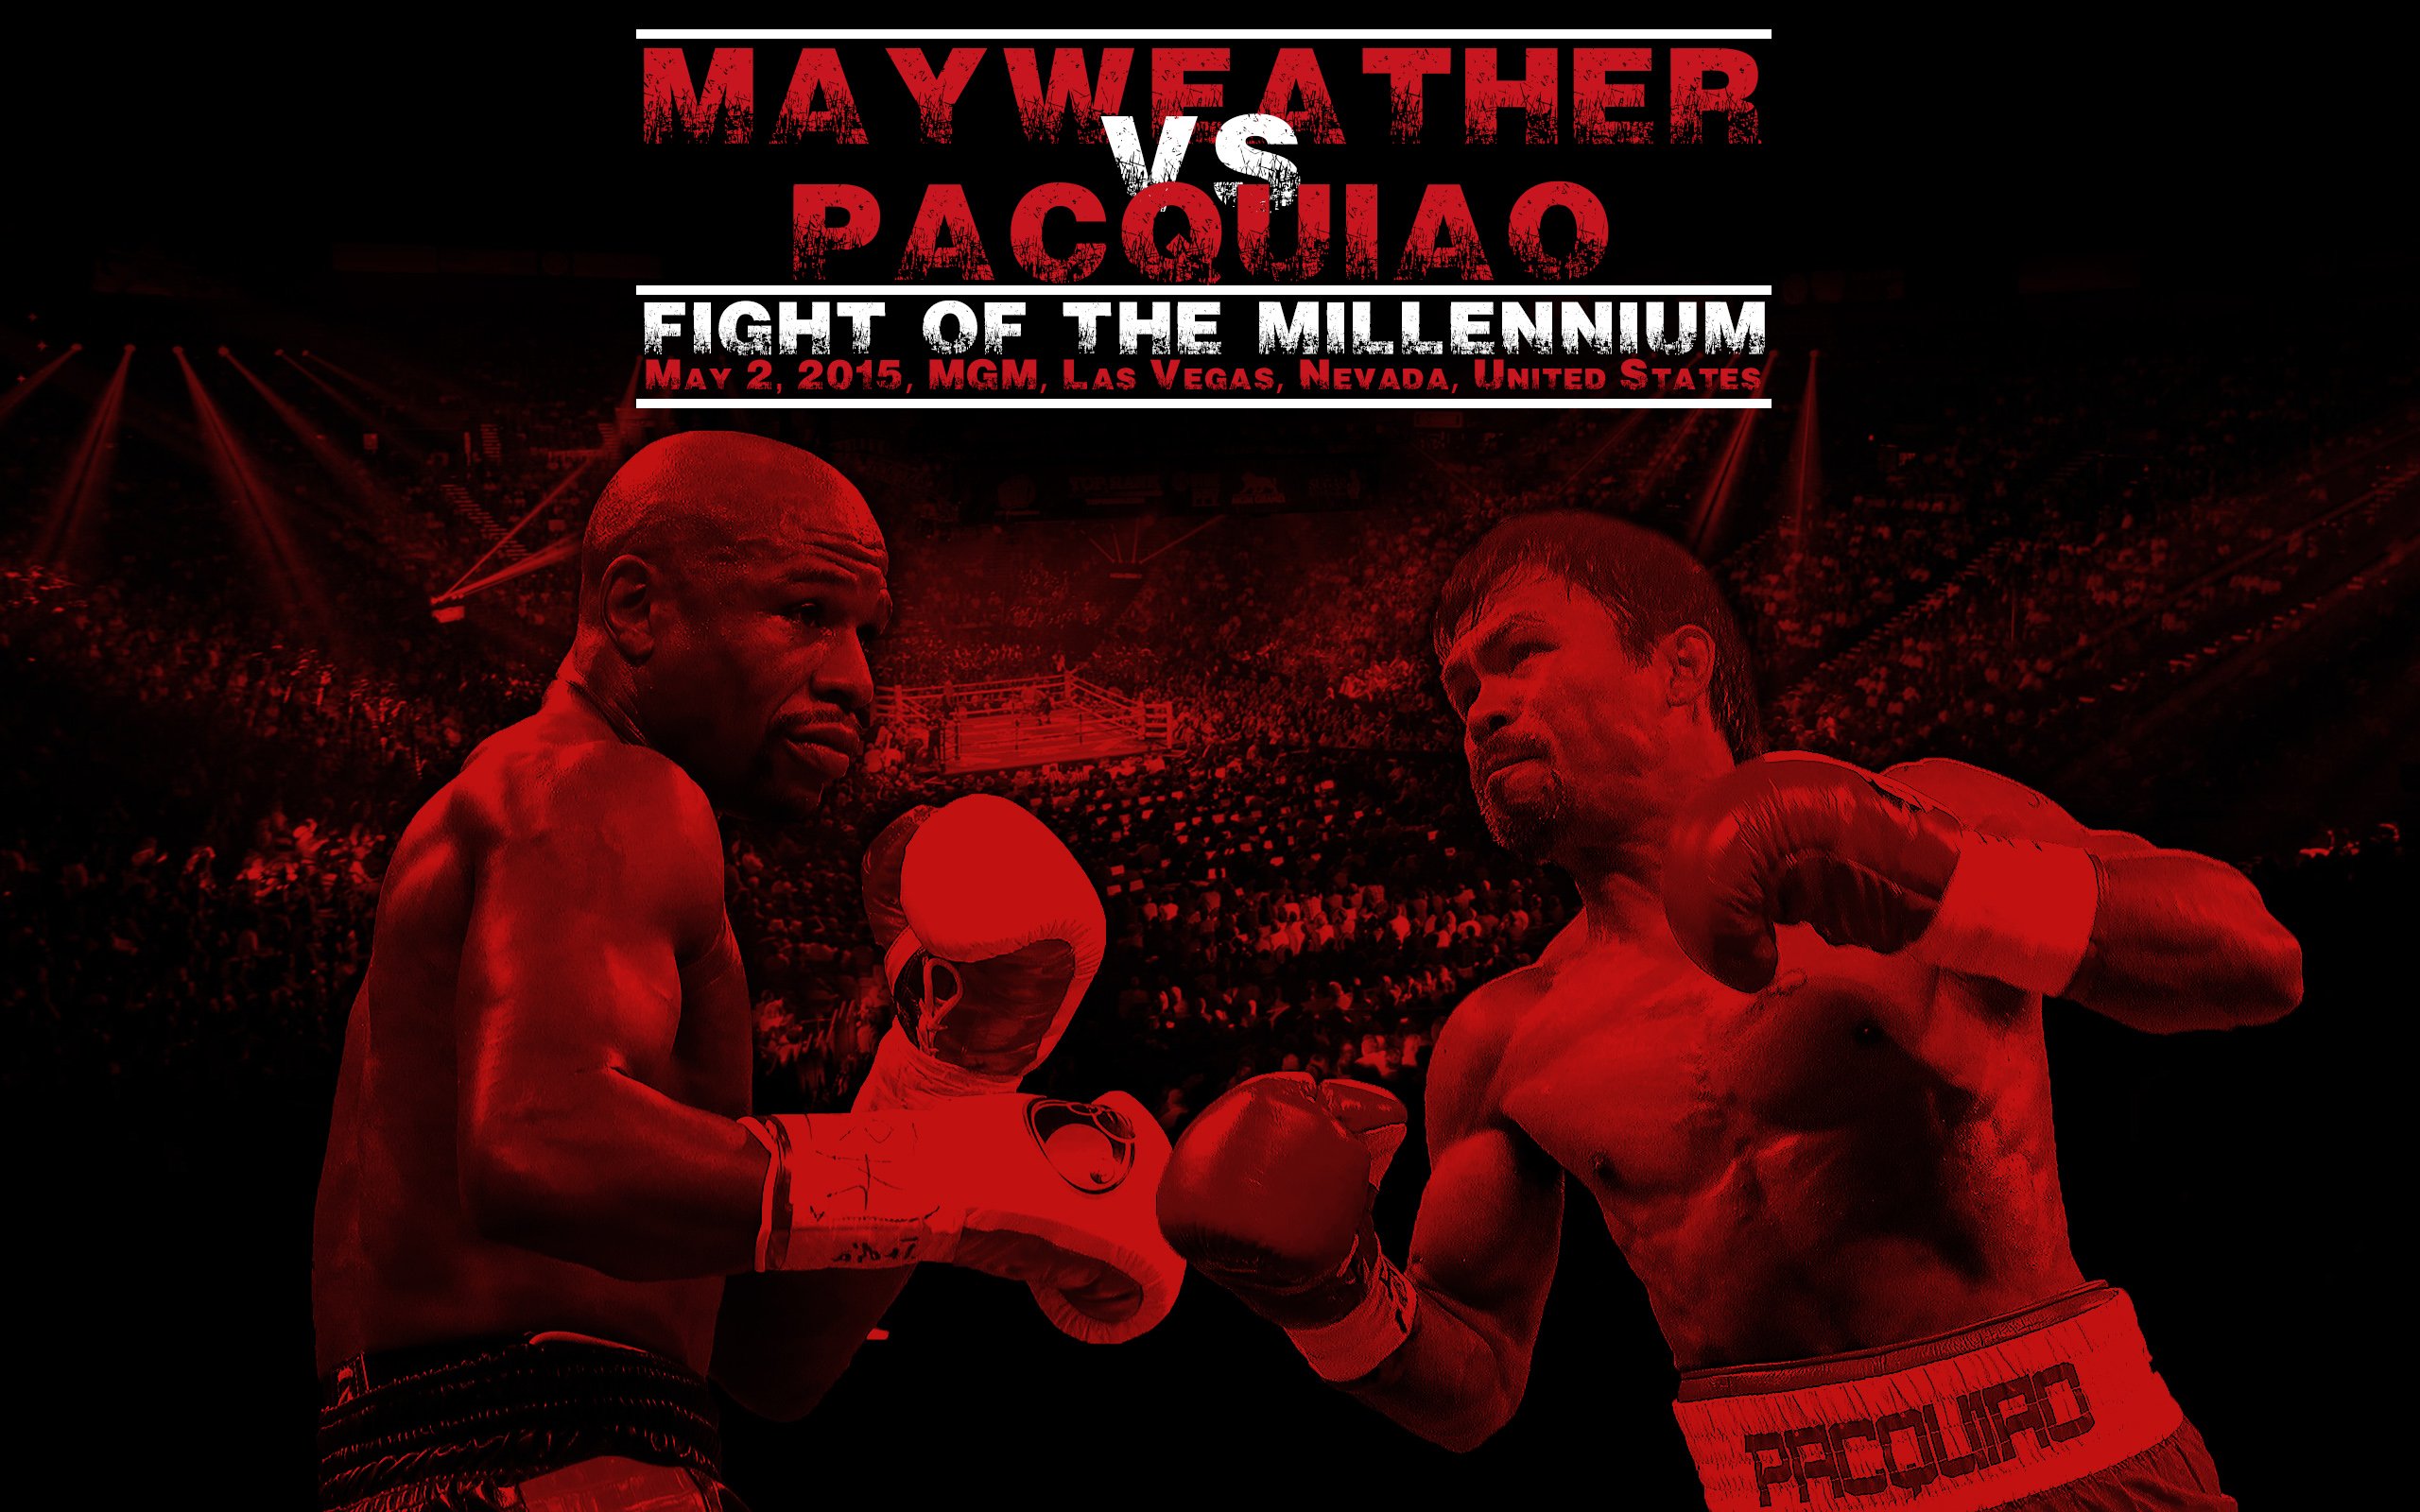 mayweather, Pacquiao, Boxing, Manny, Floyd, Fighting, Warrior, Poster Wallpaper